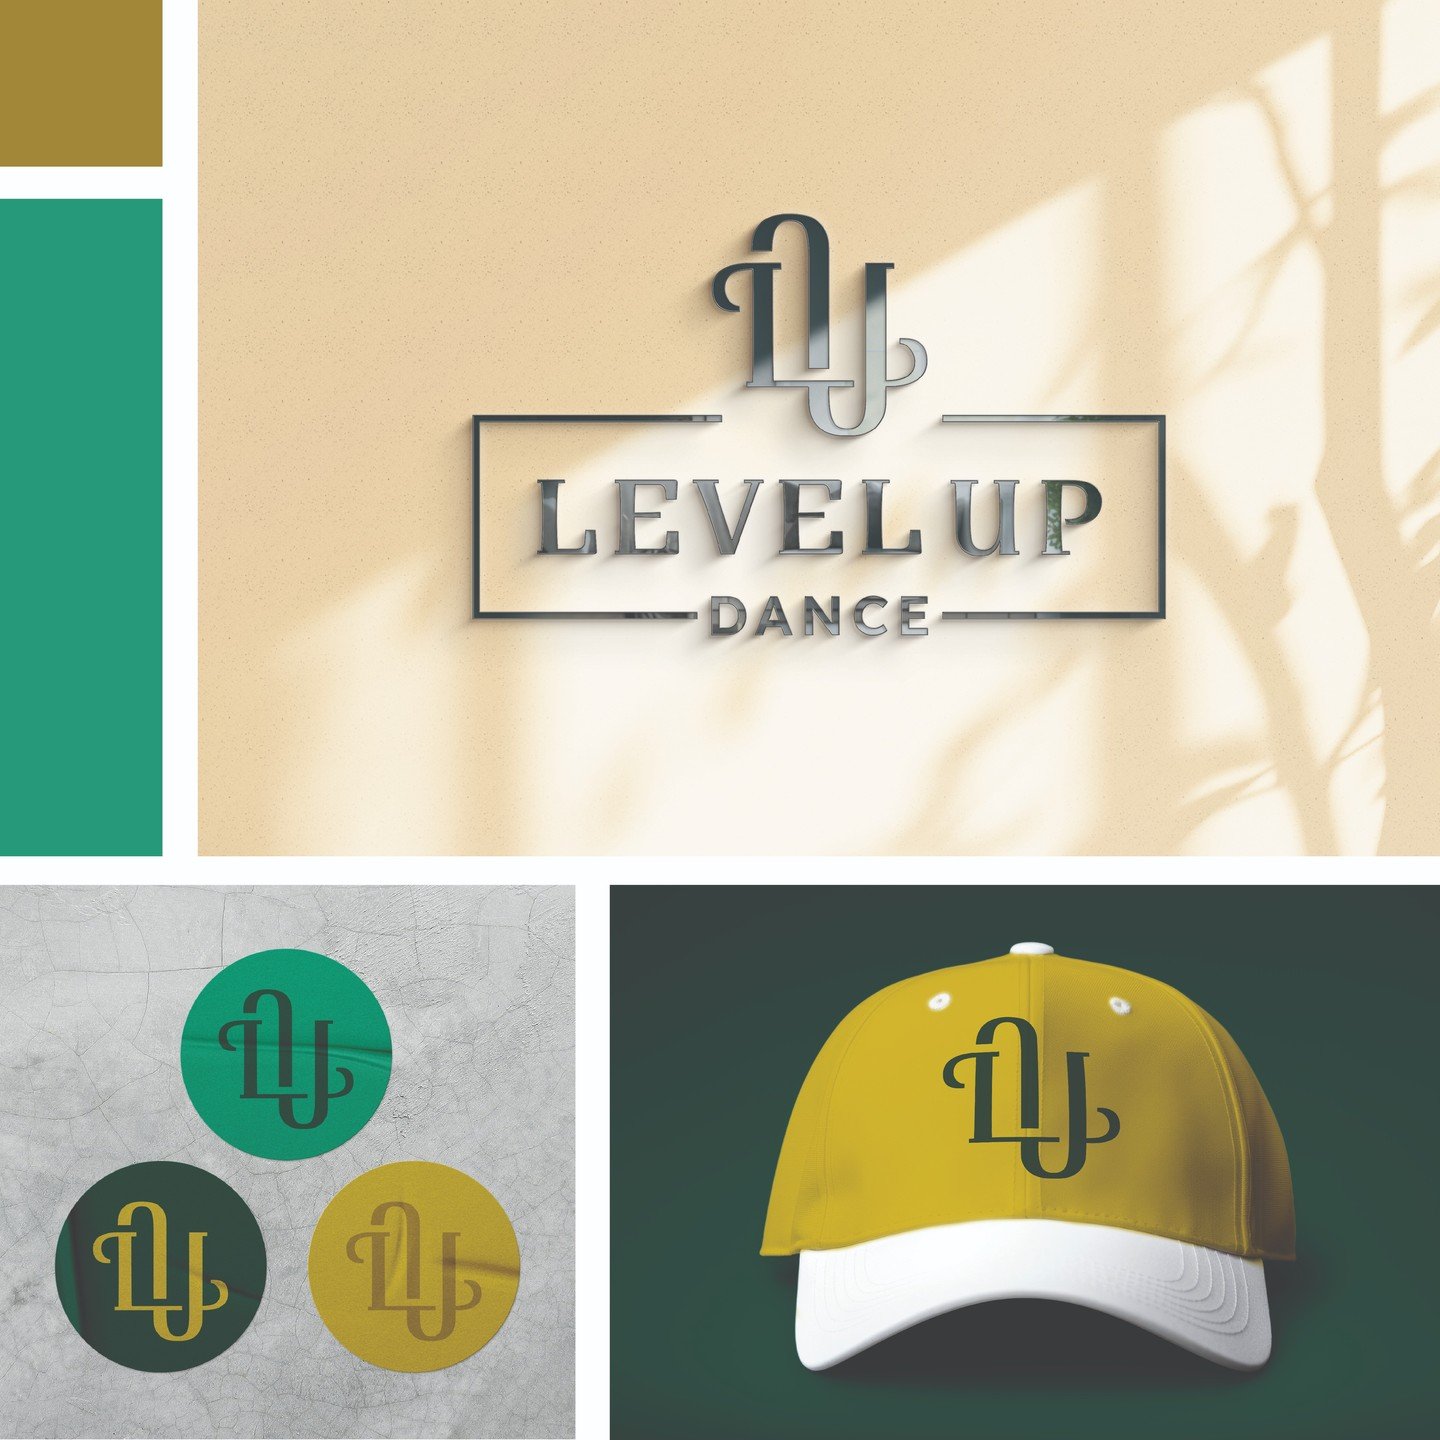 I am so excited to share this logo design for @_levelupdance_. Tess was a dream to work with and I can't wait to see how this small business grows and strengthens performance artists in our community under her incredible leadership.

Level Up Dance o